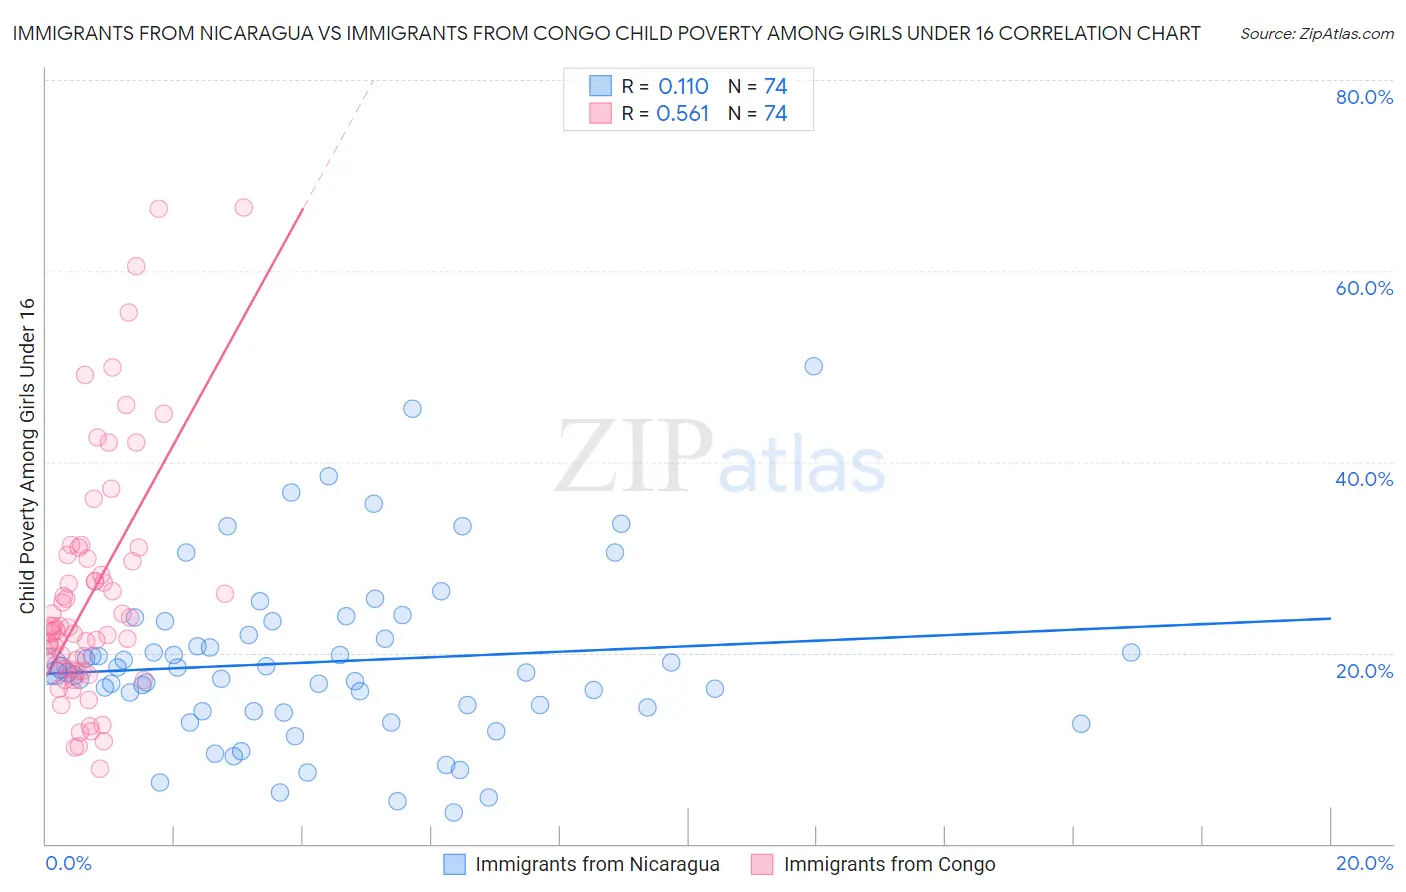 Immigrants from Nicaragua vs Immigrants from Congo Child Poverty Among Girls Under 16